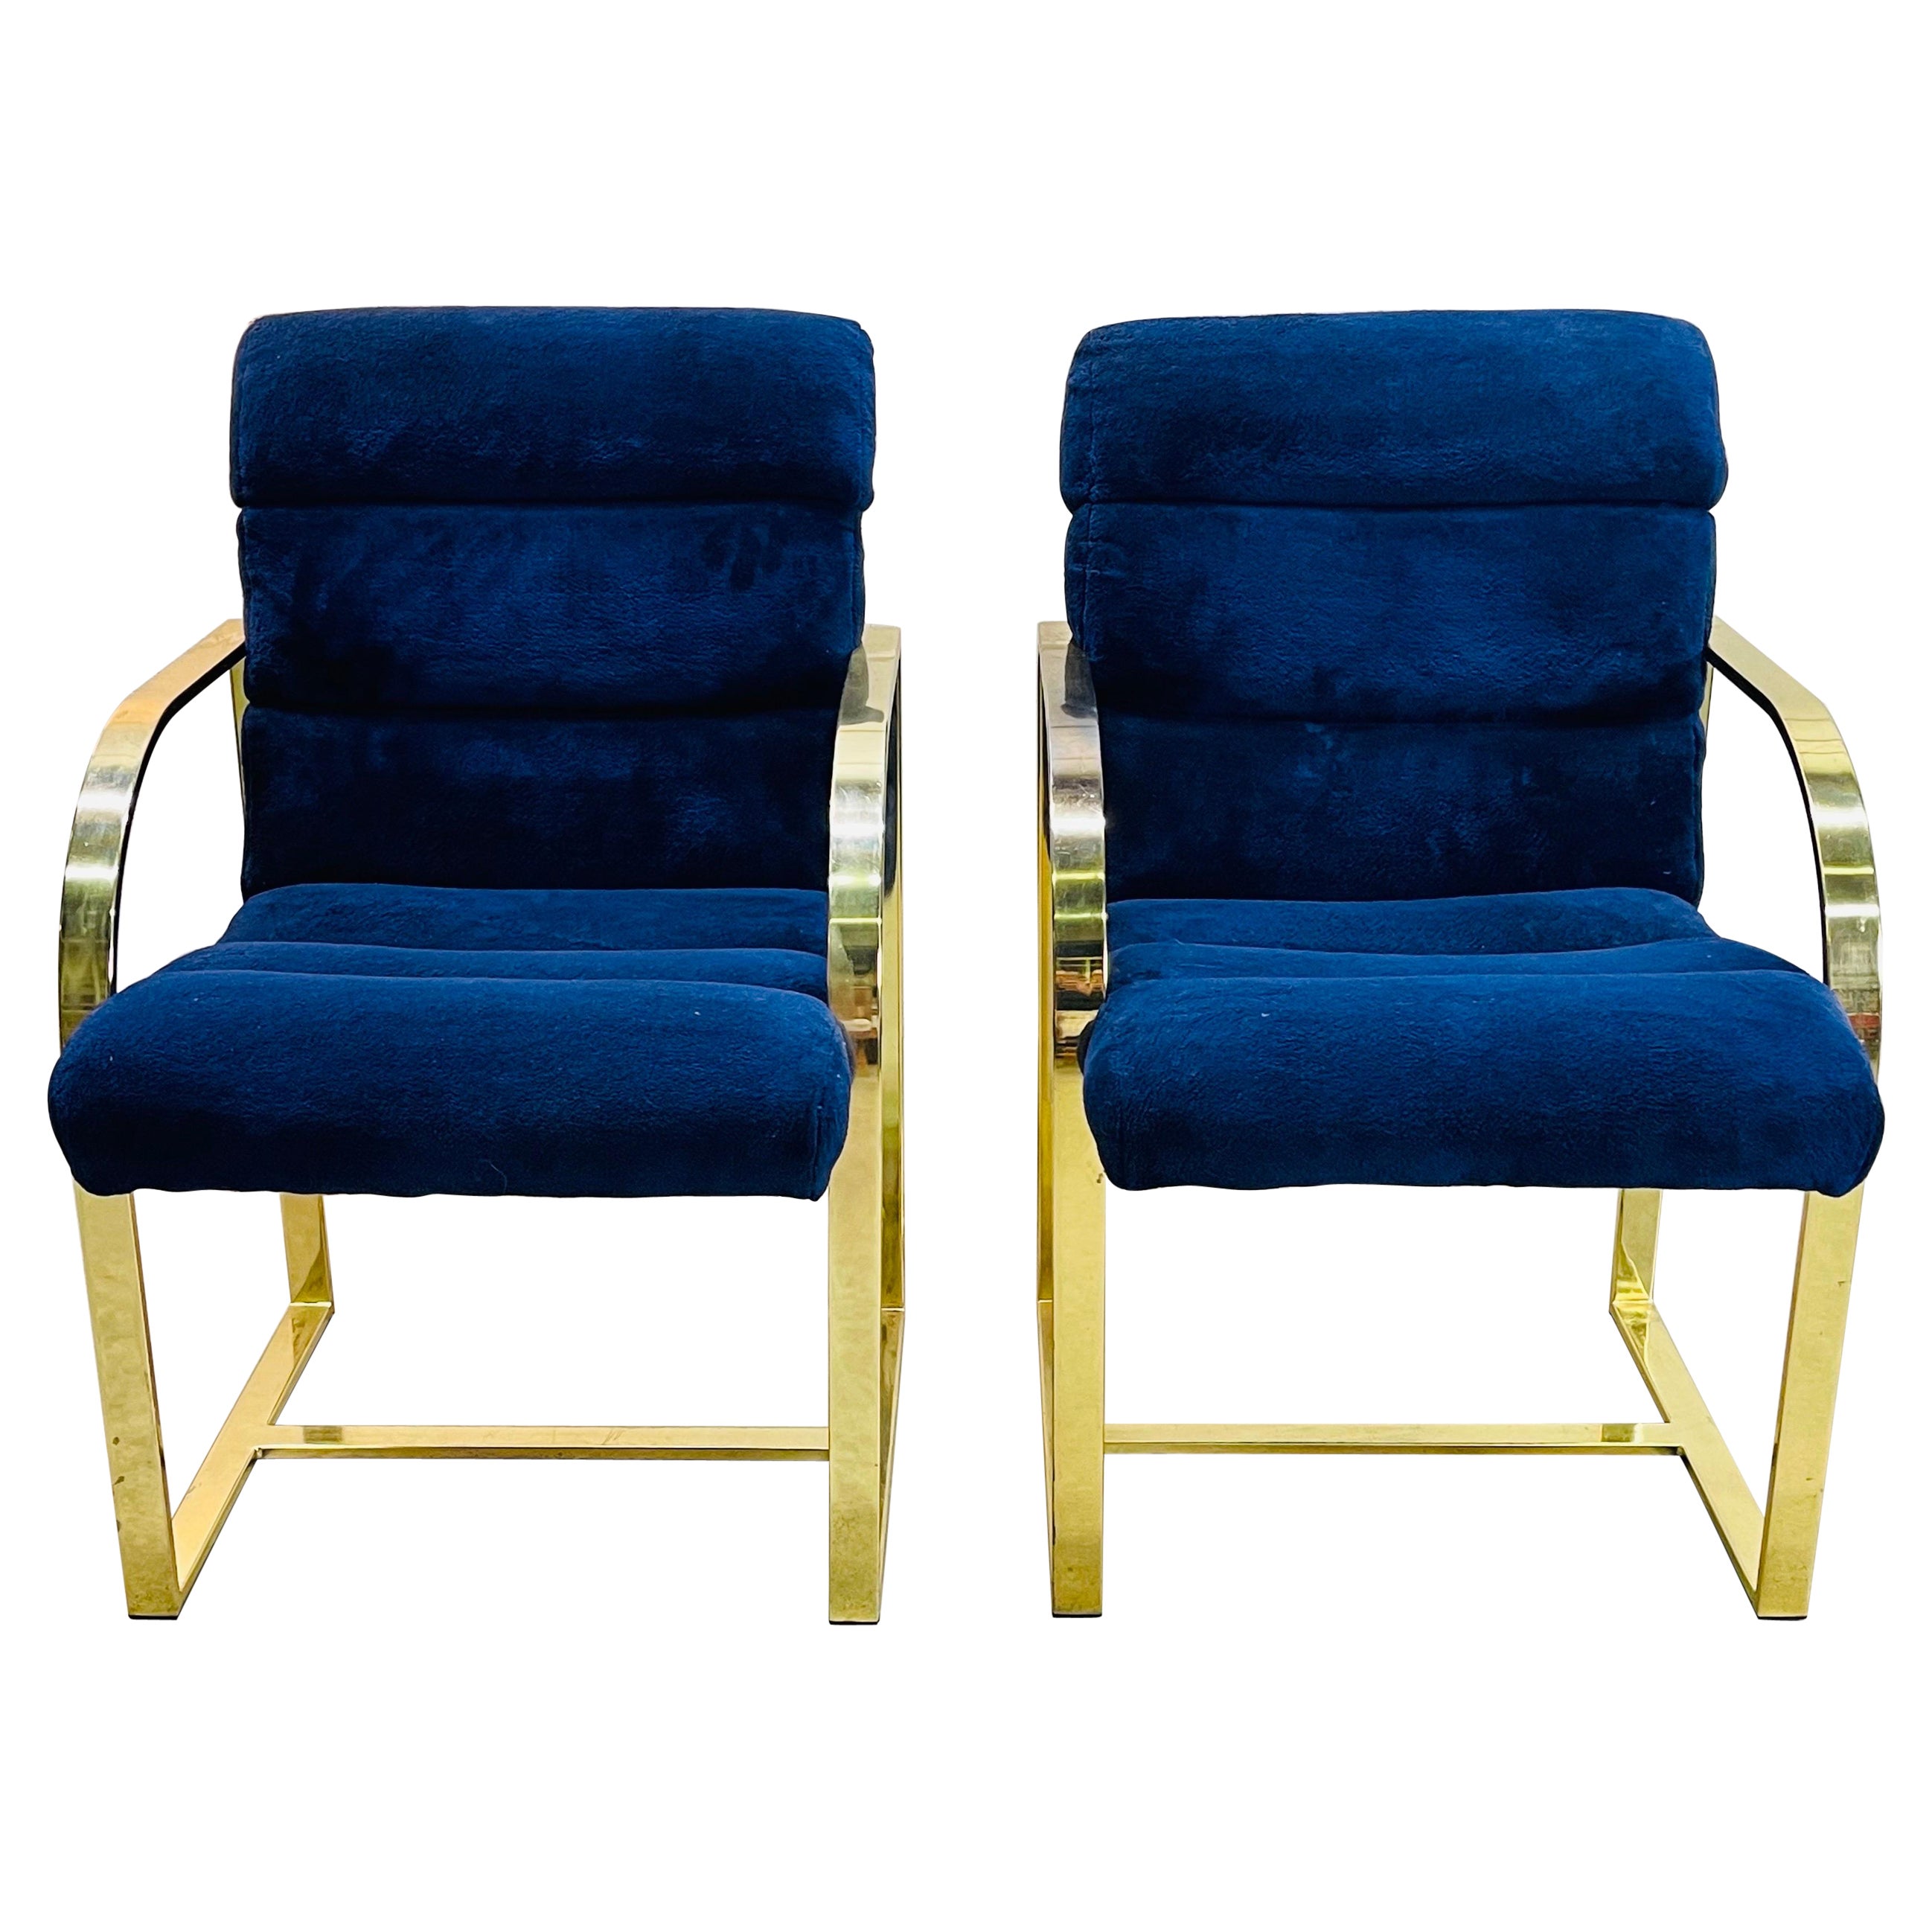 1970s Milo Baughman for Thayer Coggin Flat Bar Dining Chairs, Pair For Sale